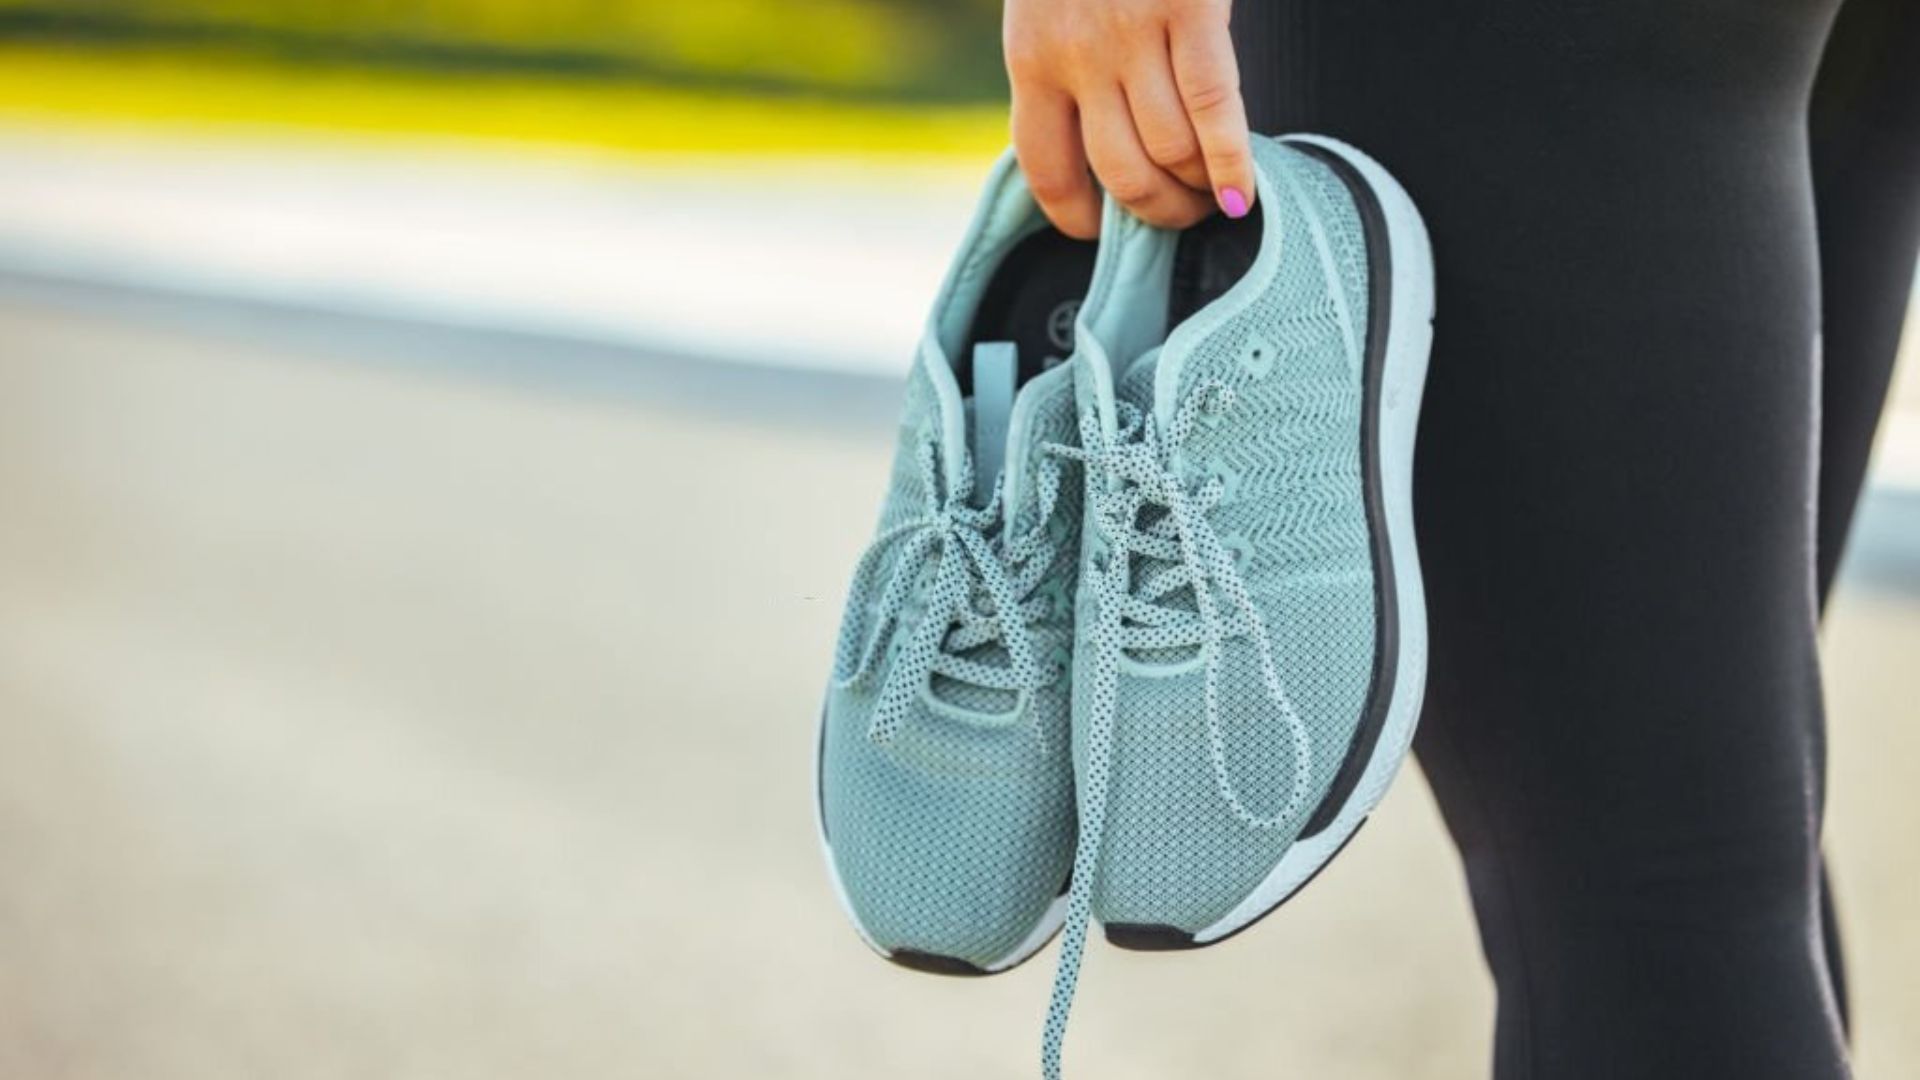 How to Choose the Right Gym Shoes for You